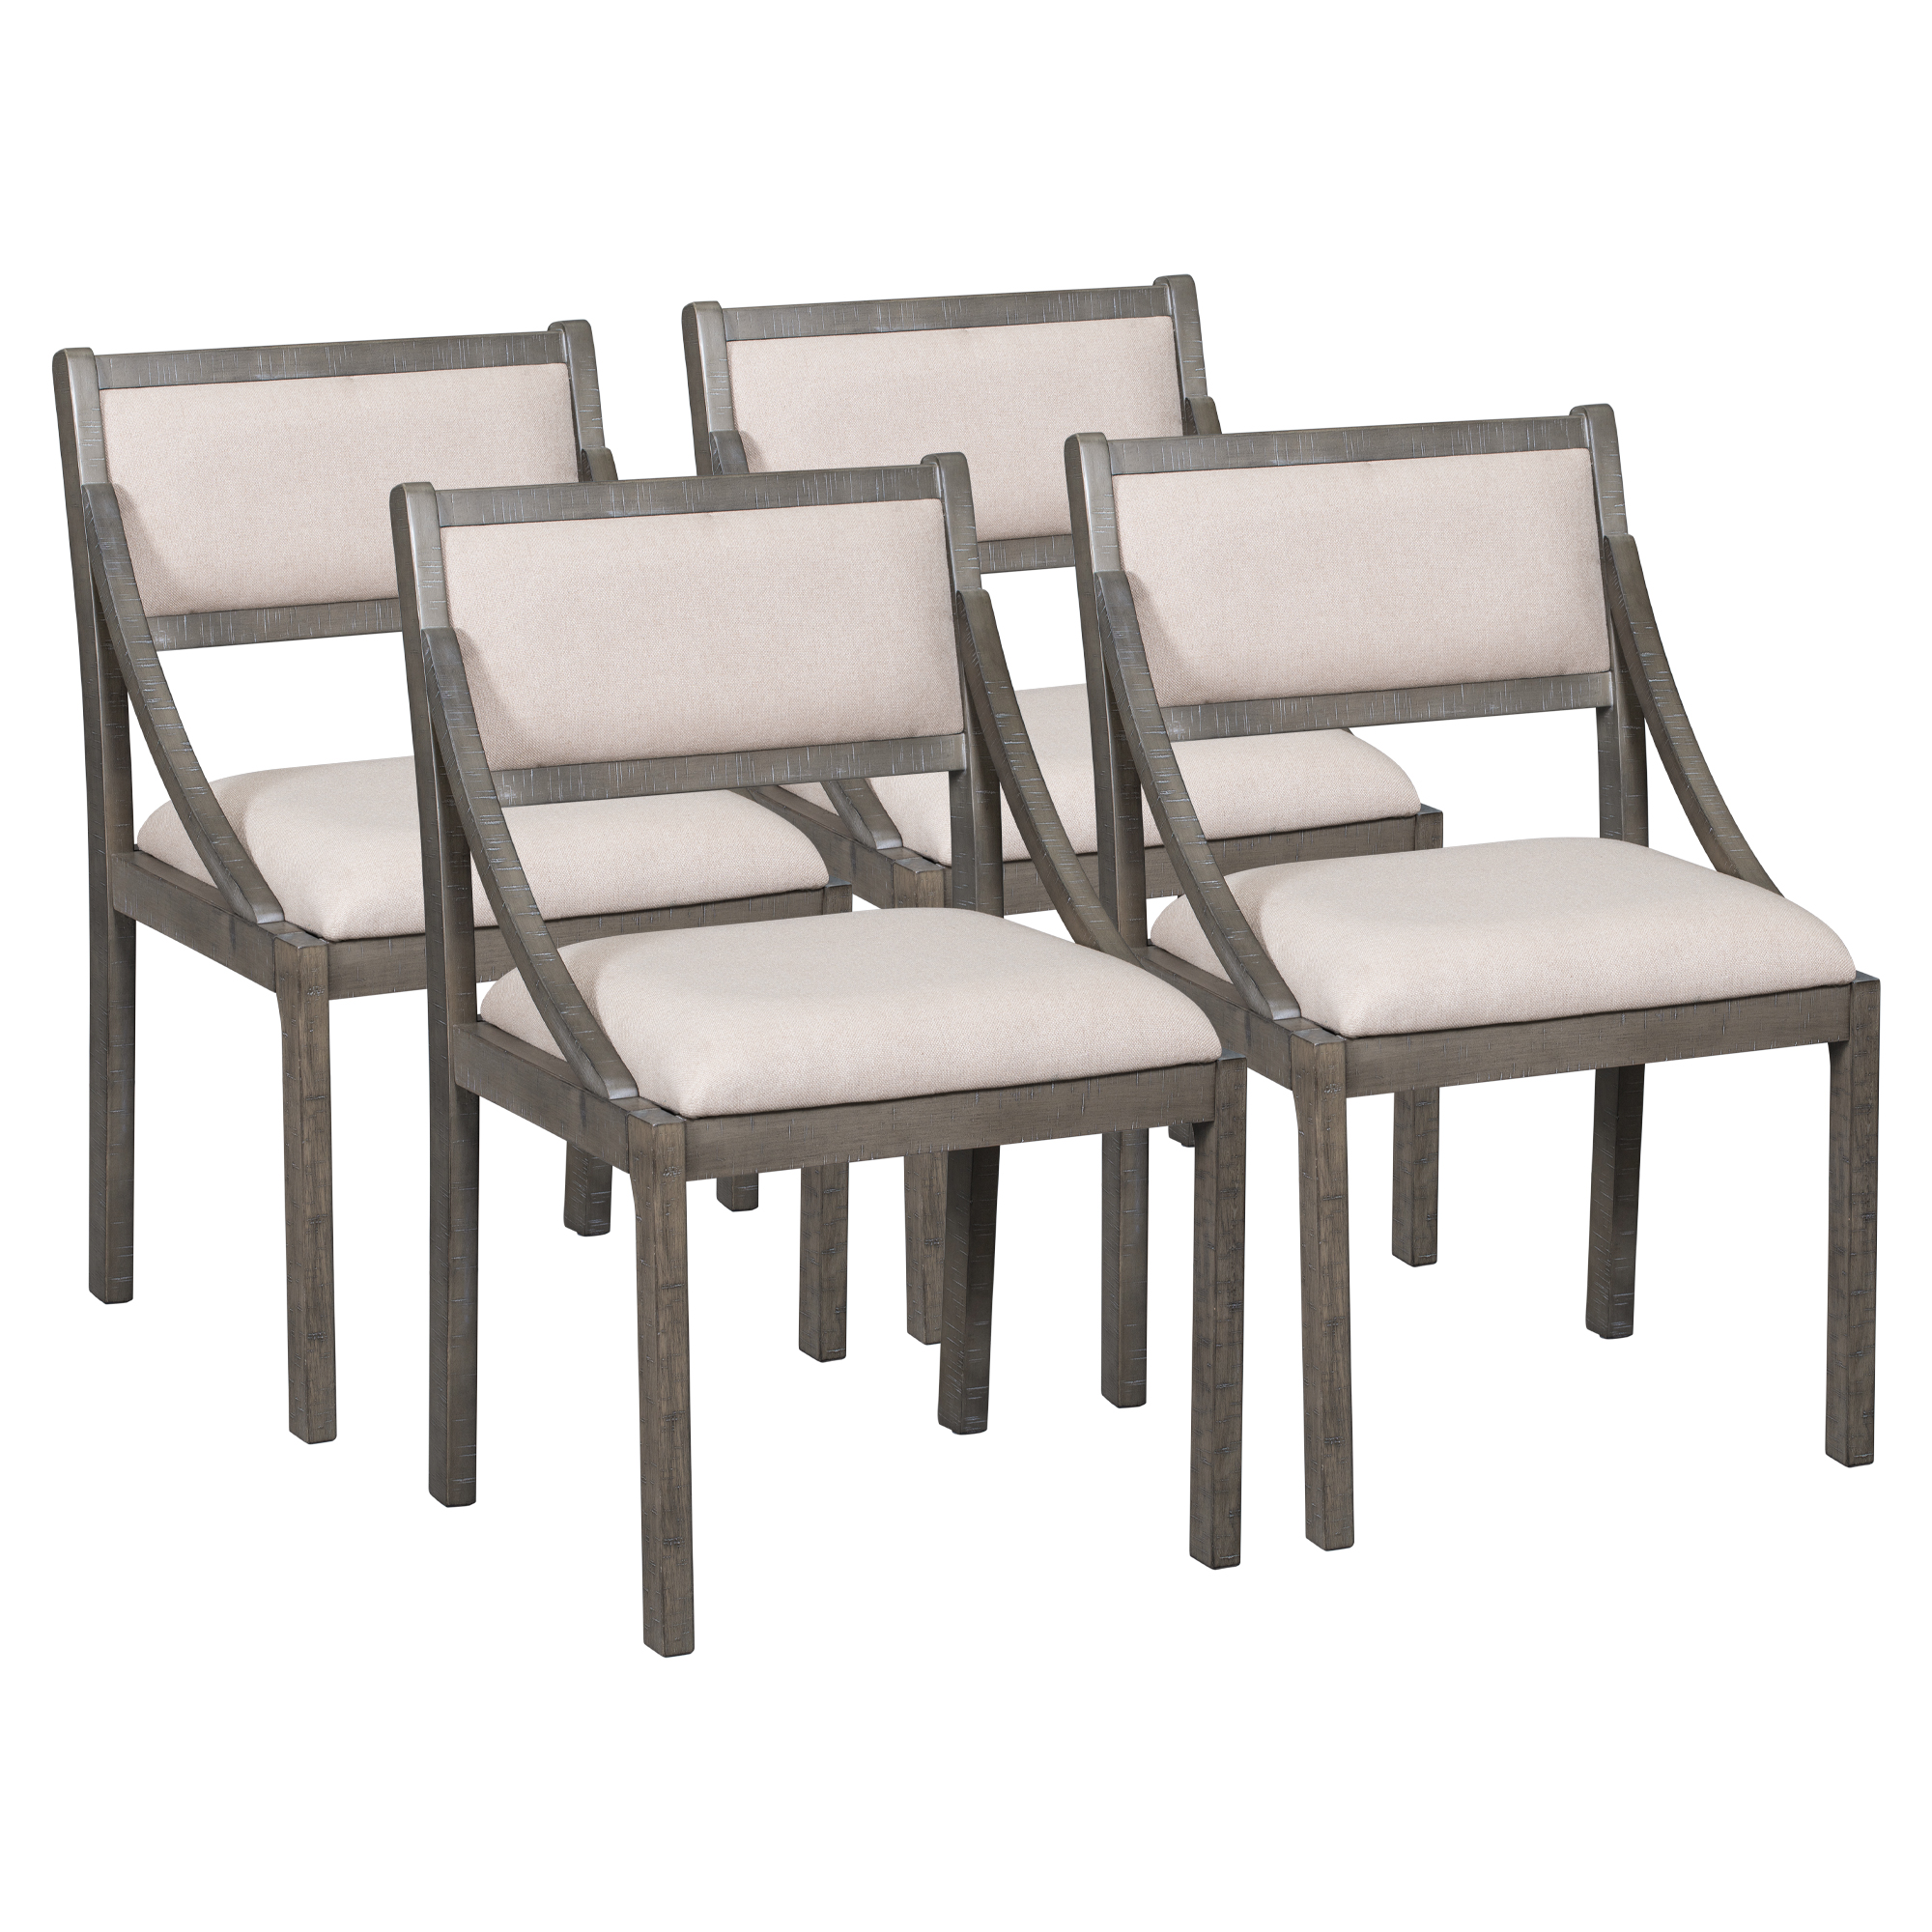 Retro Wood Dining Chairs Set Of 4 - WF295748AAP